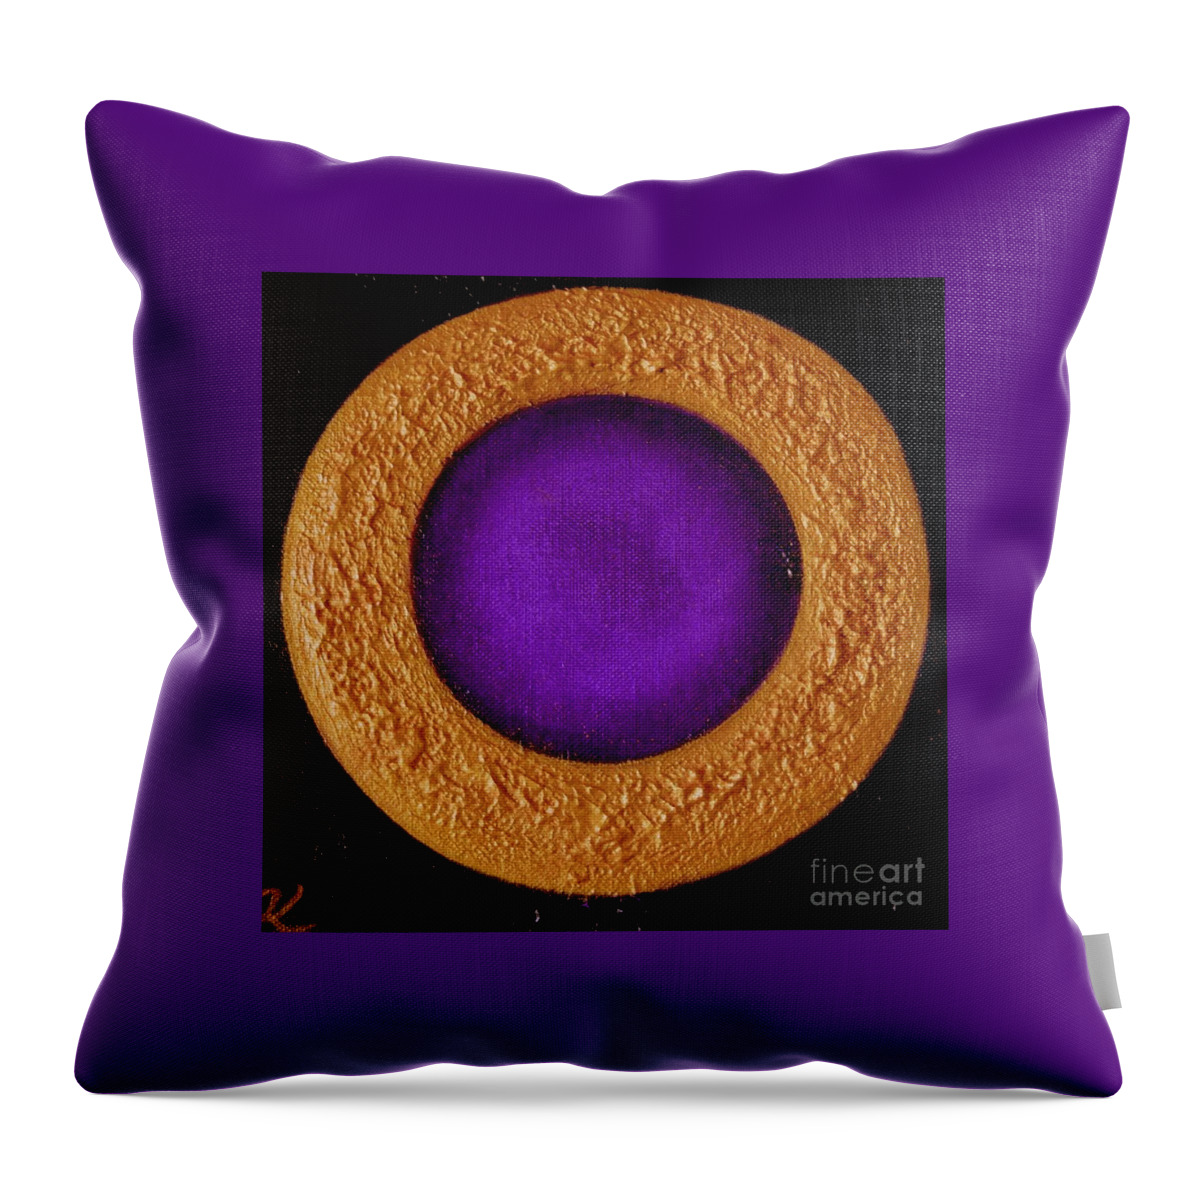 Moon.light Throw Pillow featuring the painting Moon Light by Kumiko Mayer